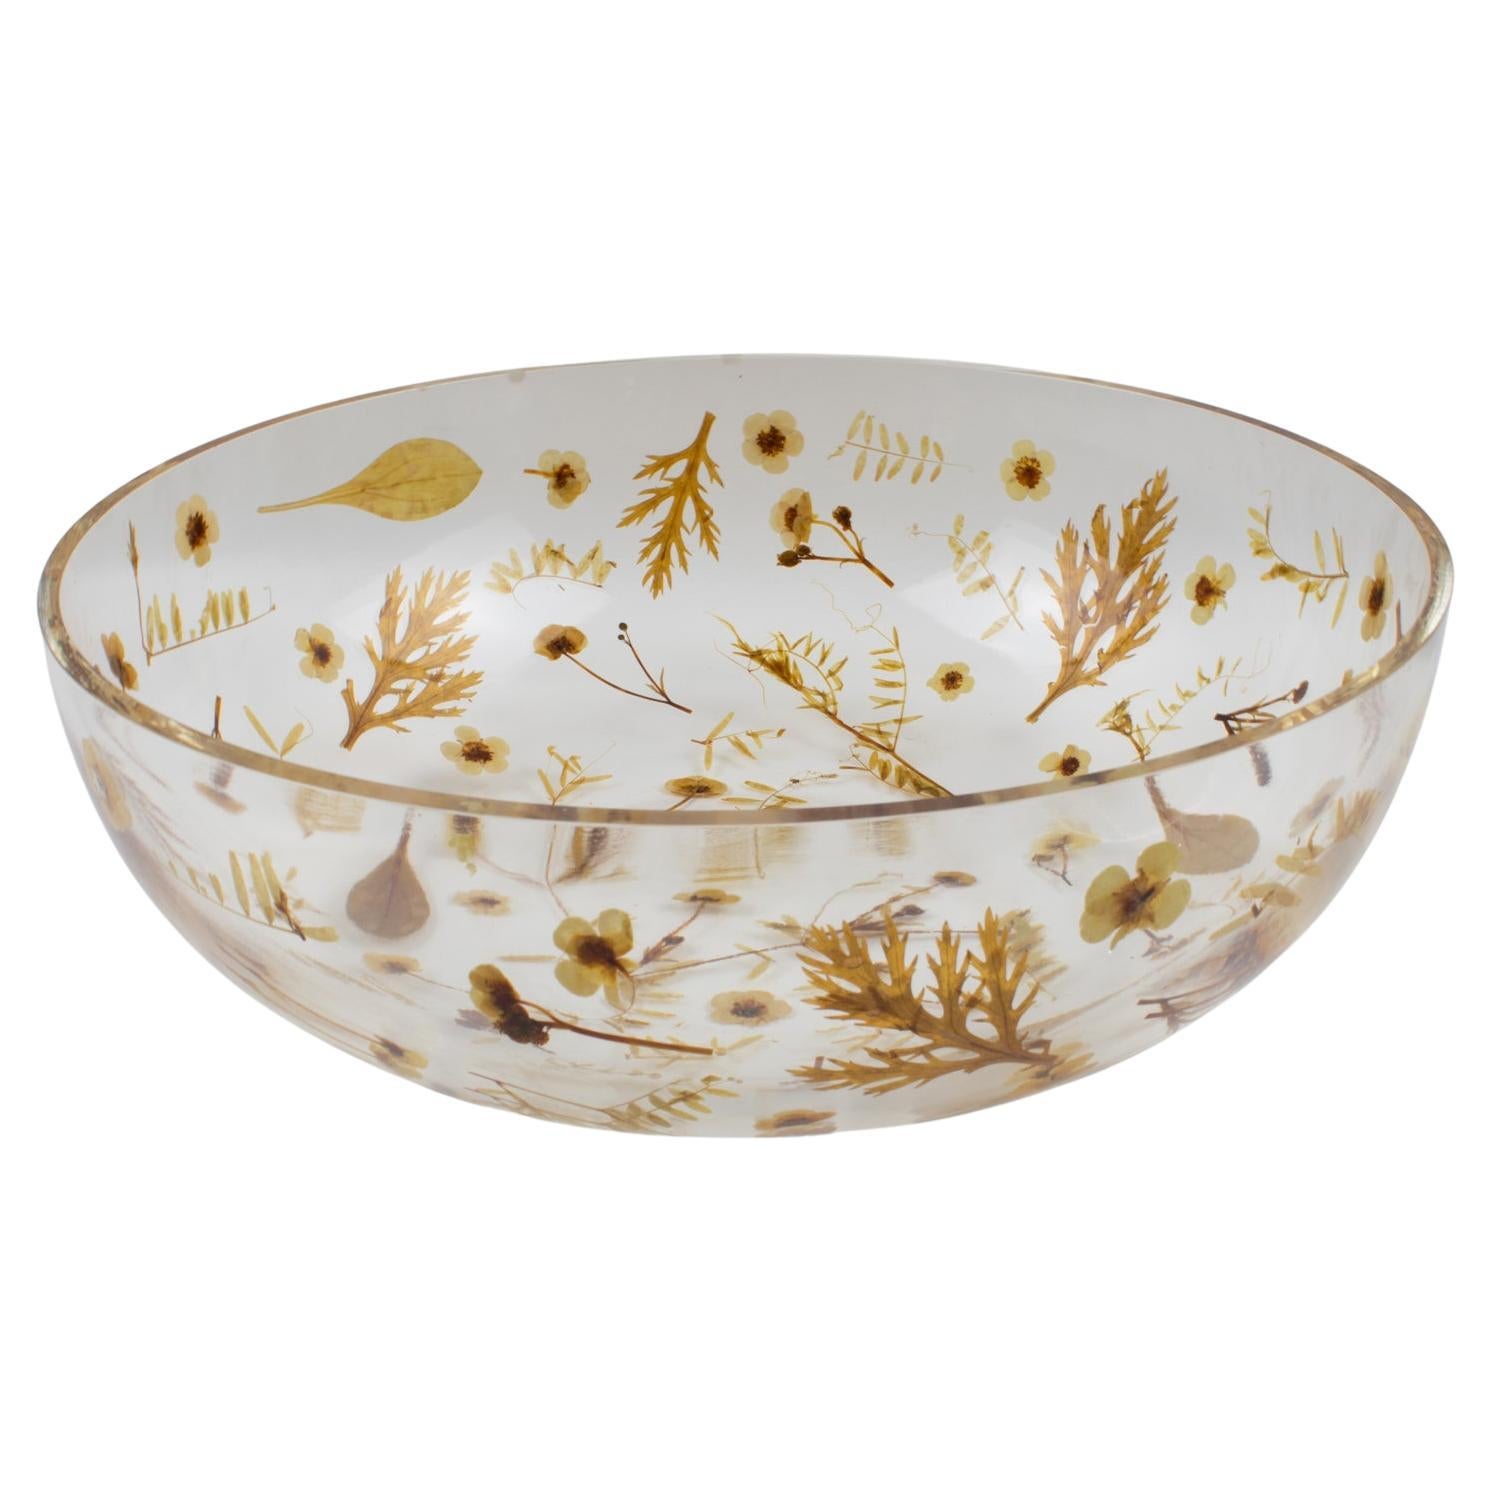 Italian Resin Bowl Centerpiece with Leaves and Flowers Inclusions, 1970s